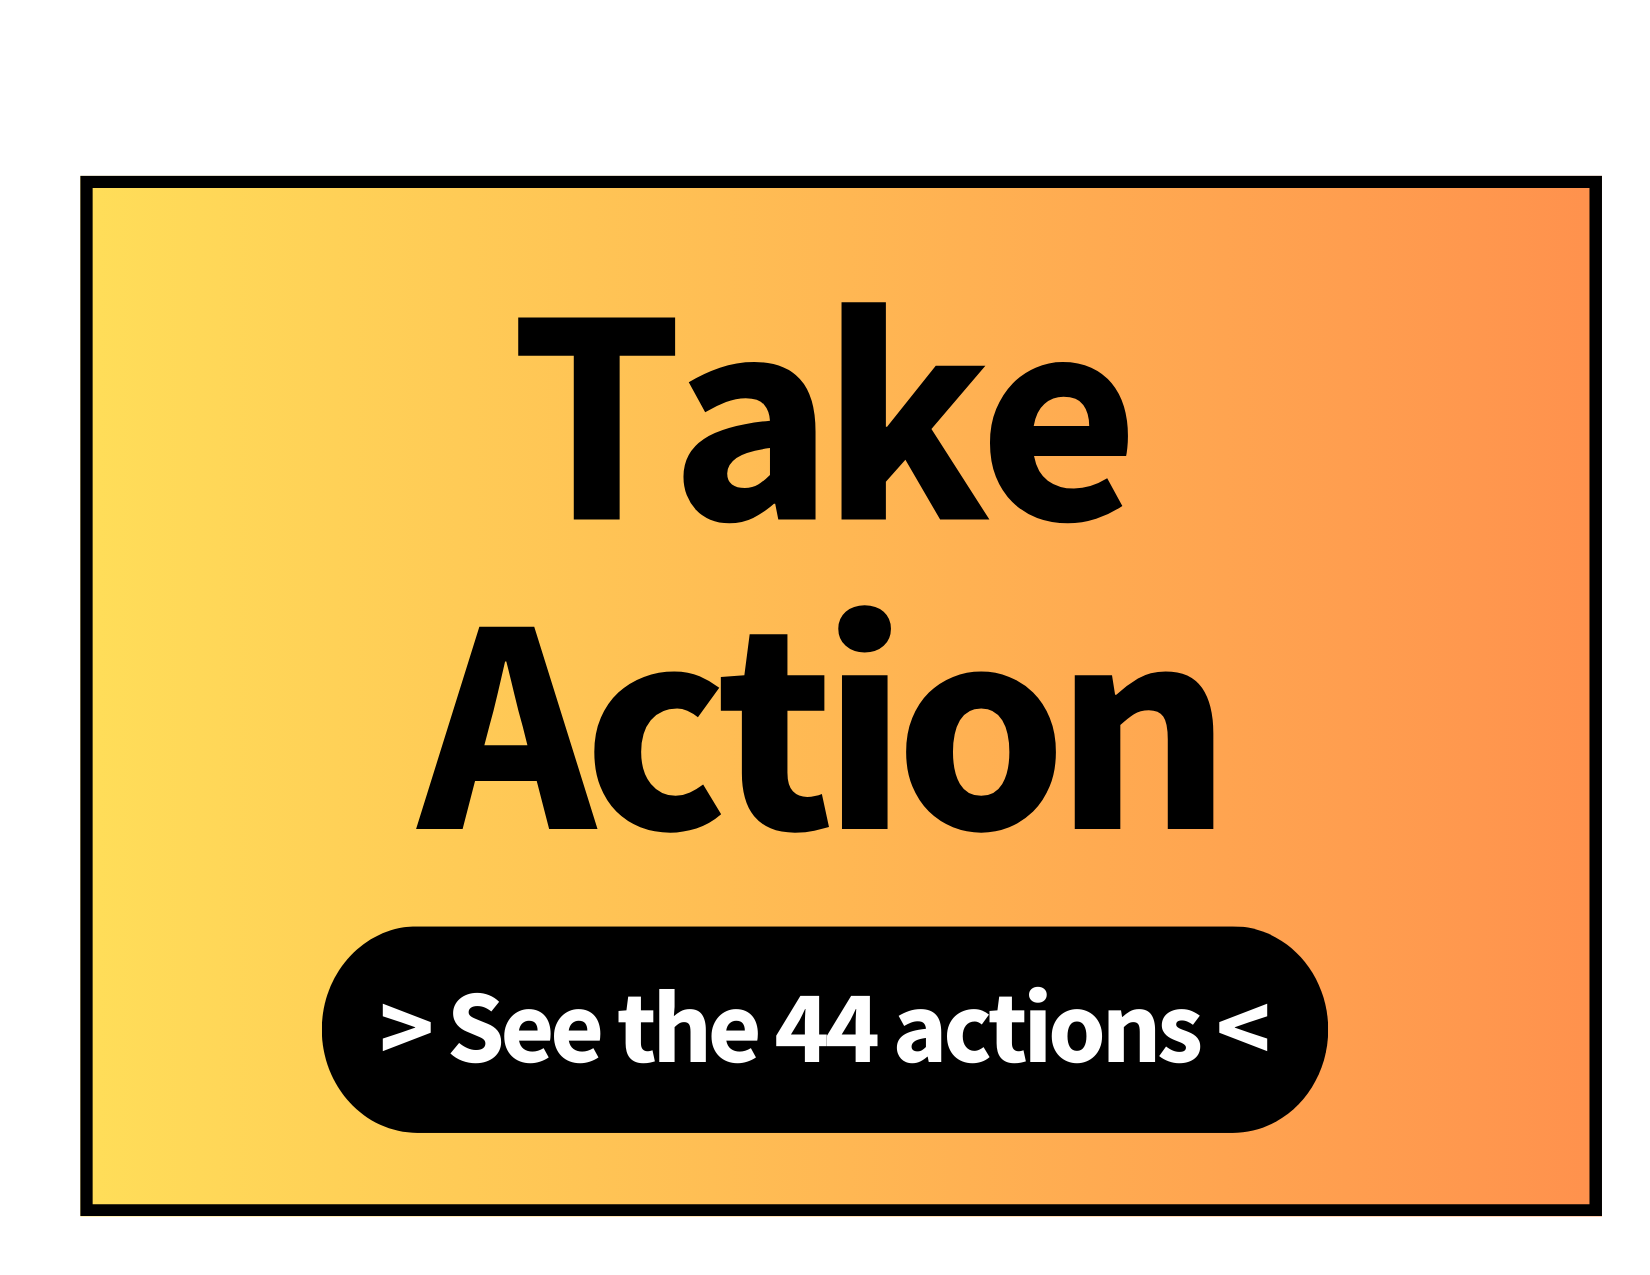 Take Action: See the 44 actions